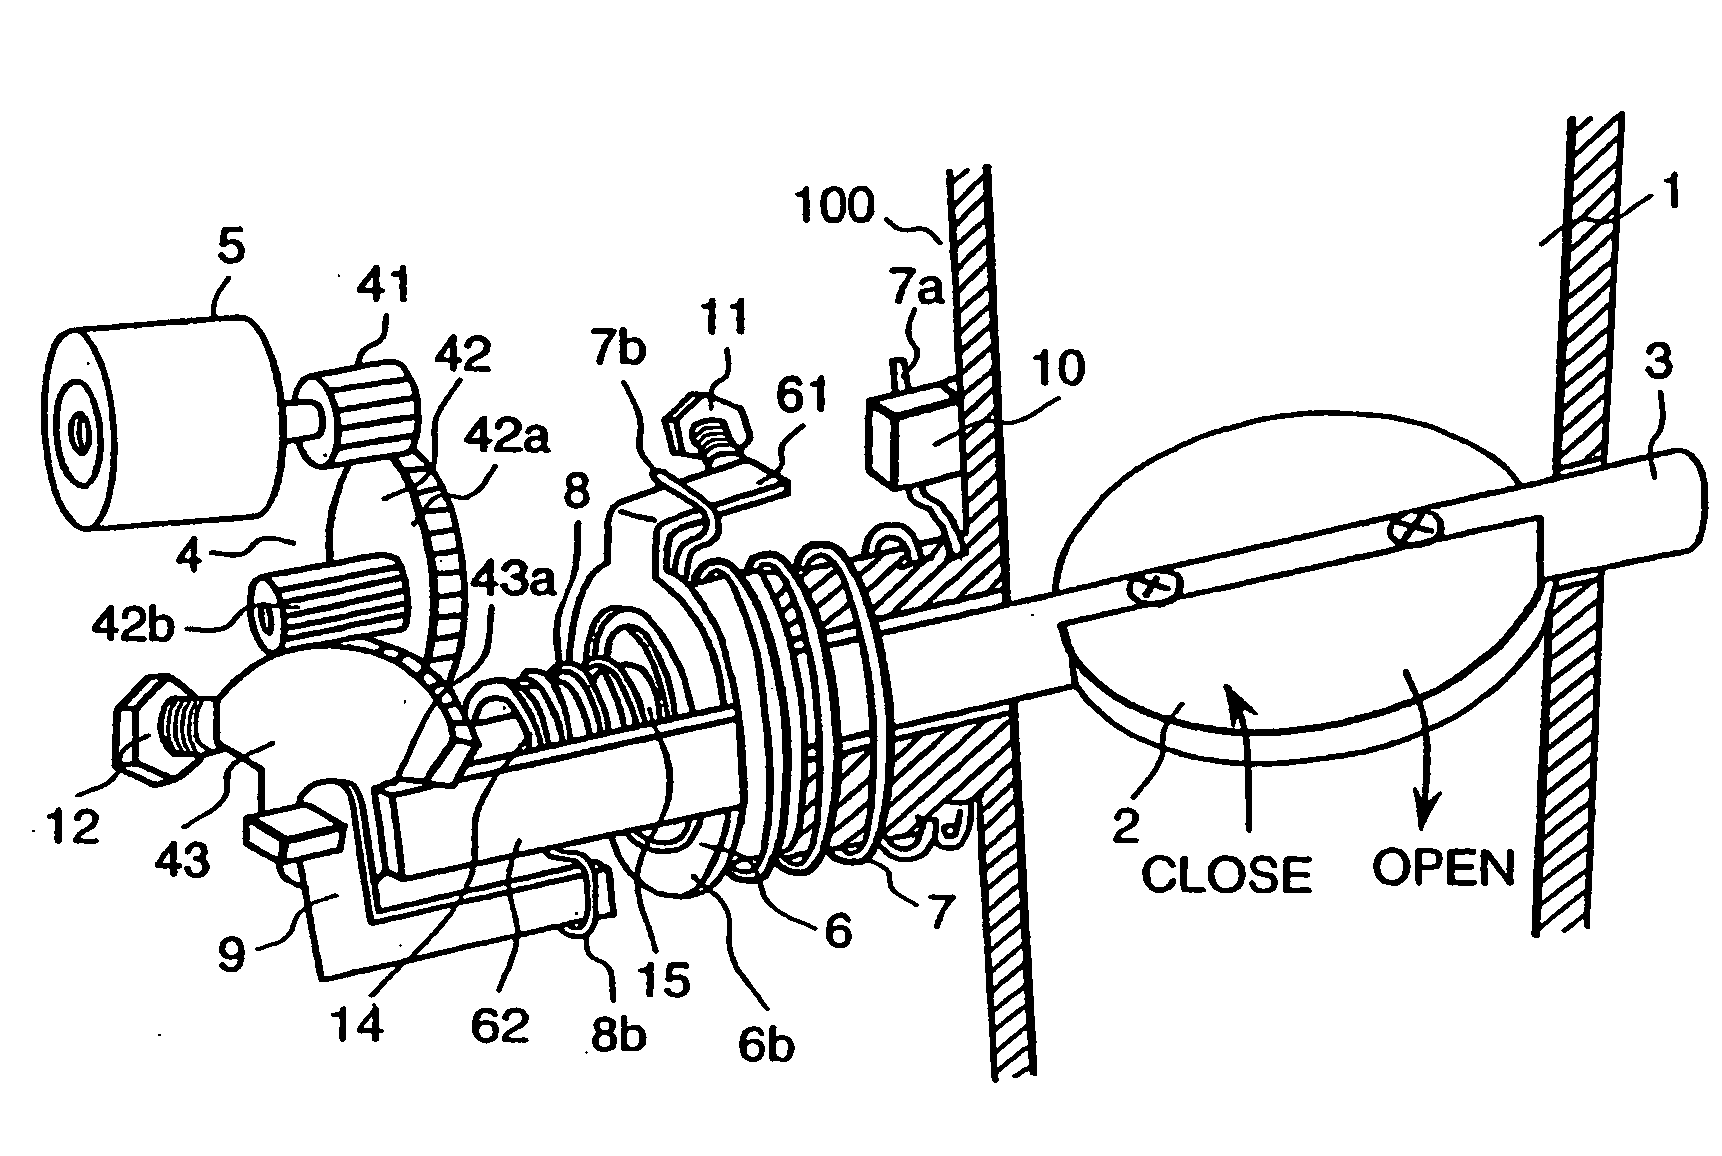 Throttle apparatus for an internal combustion engine